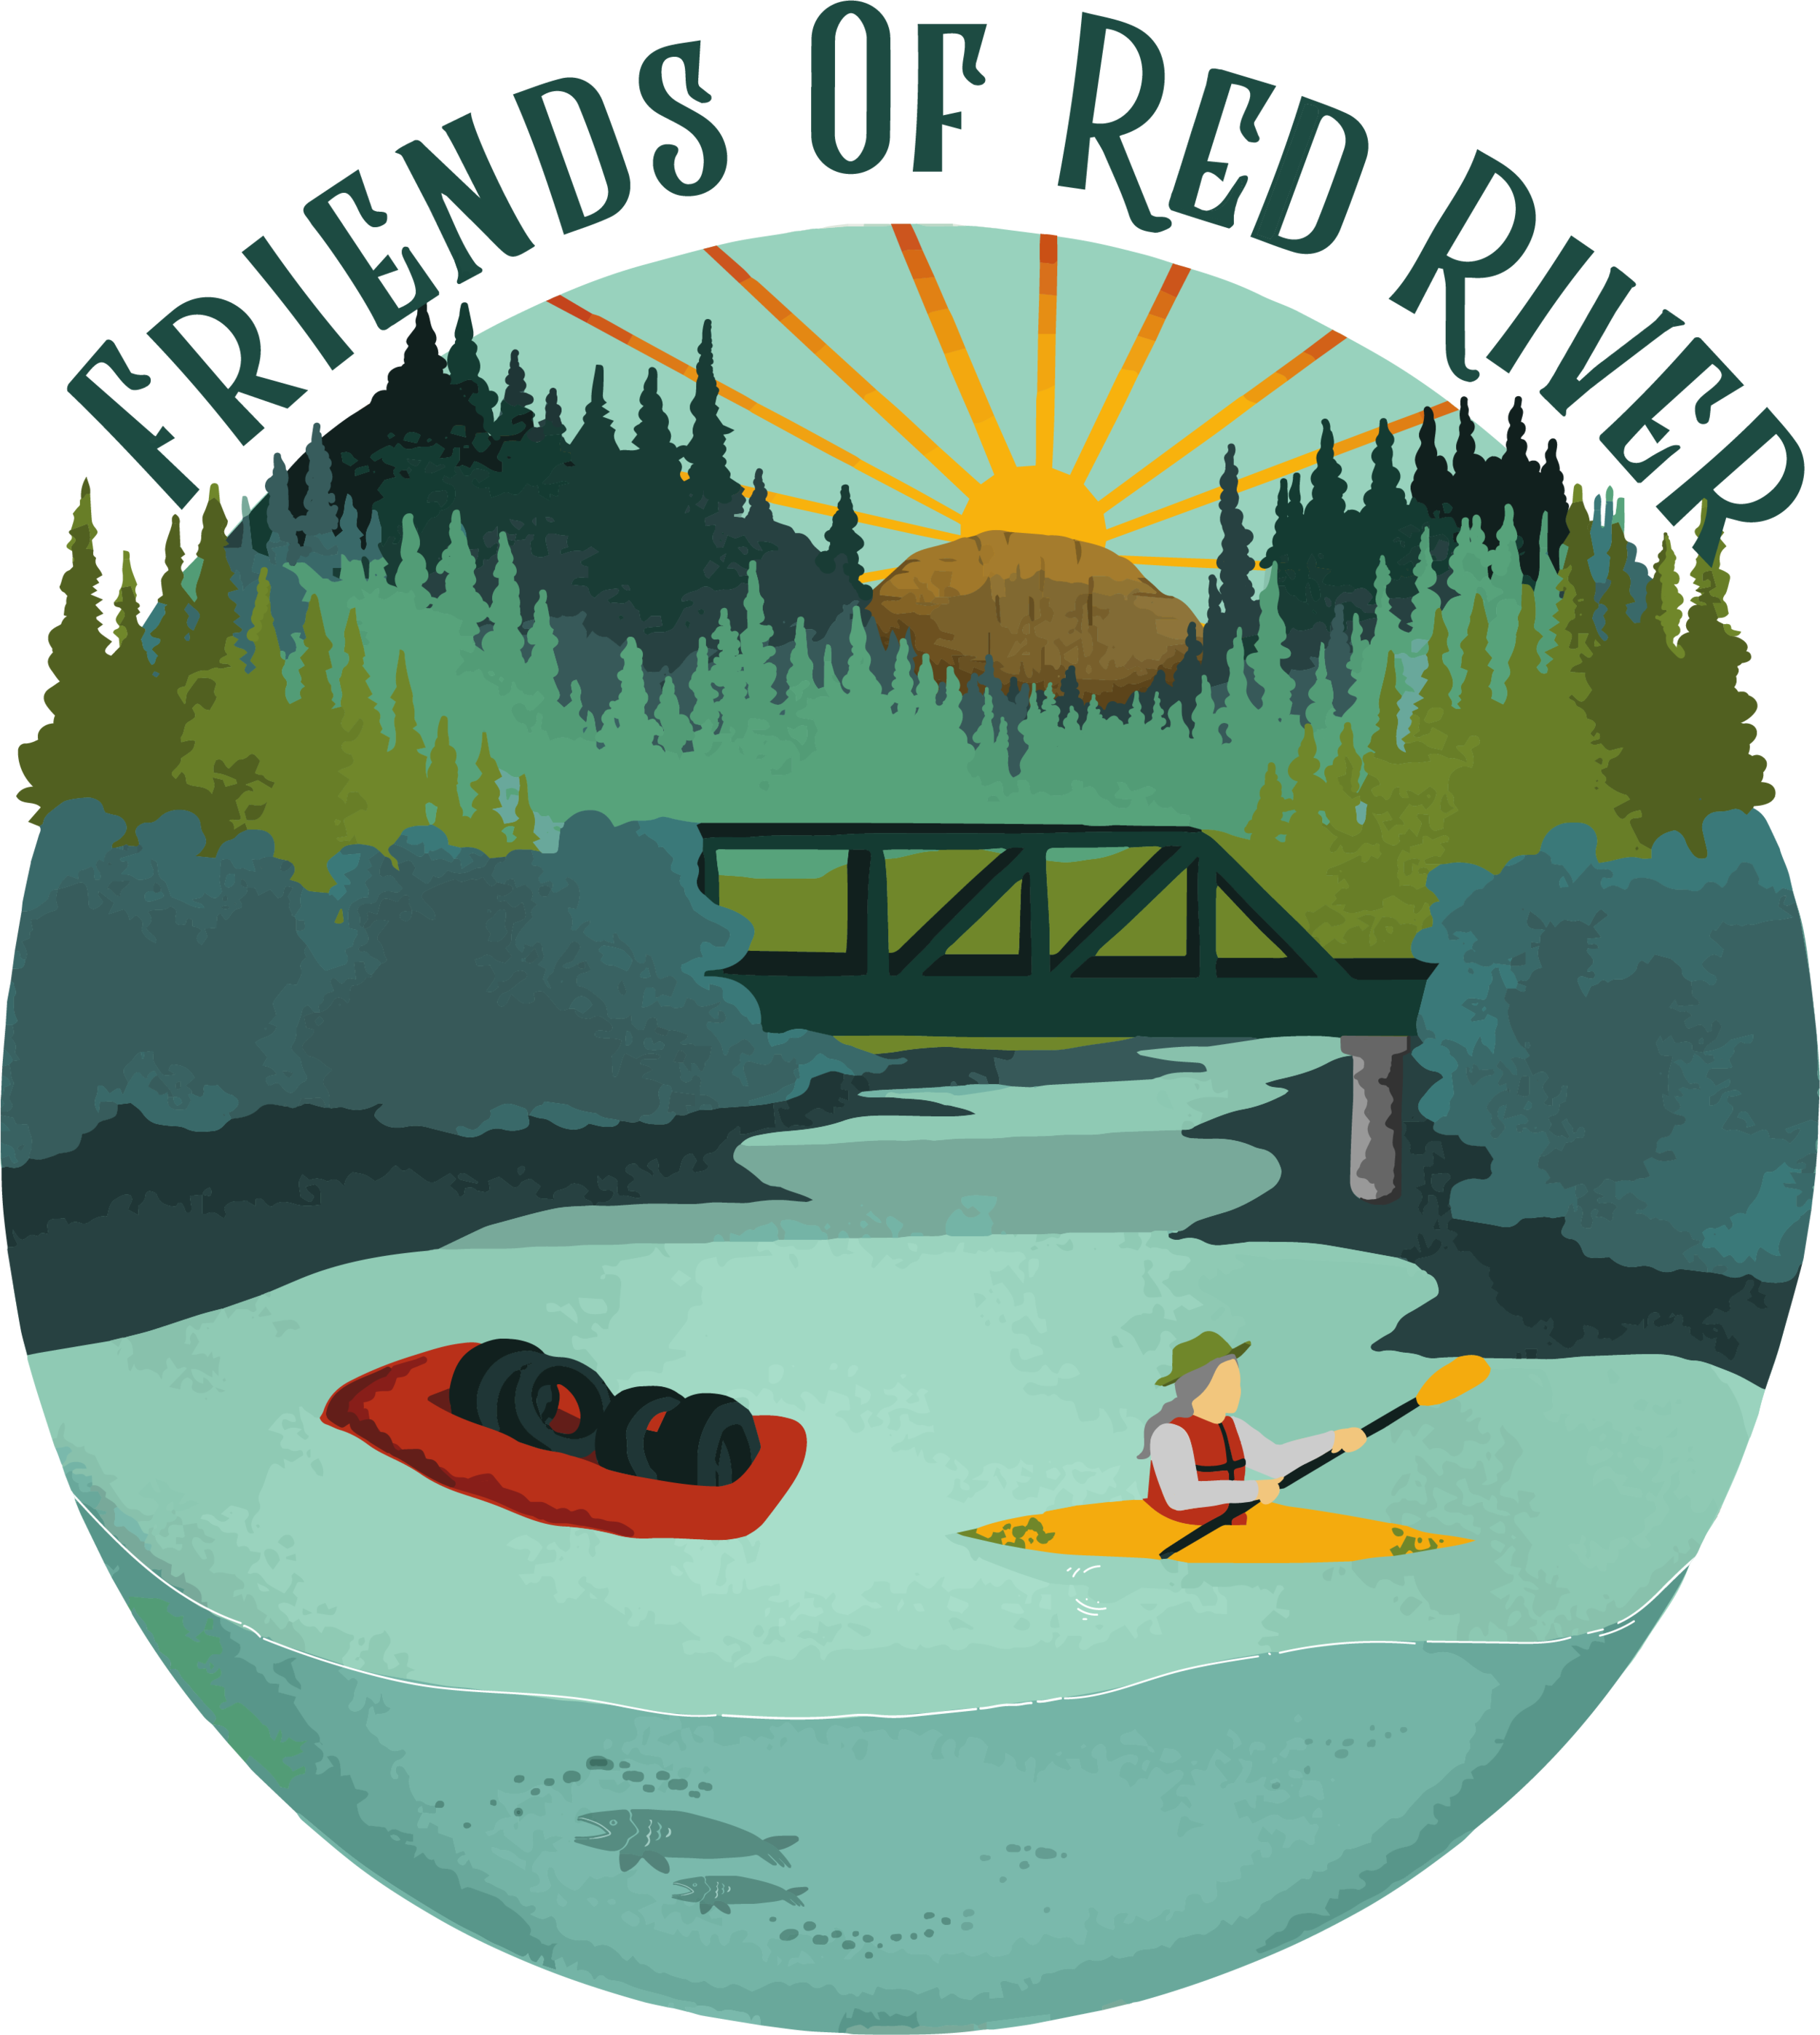 Friends of Red River